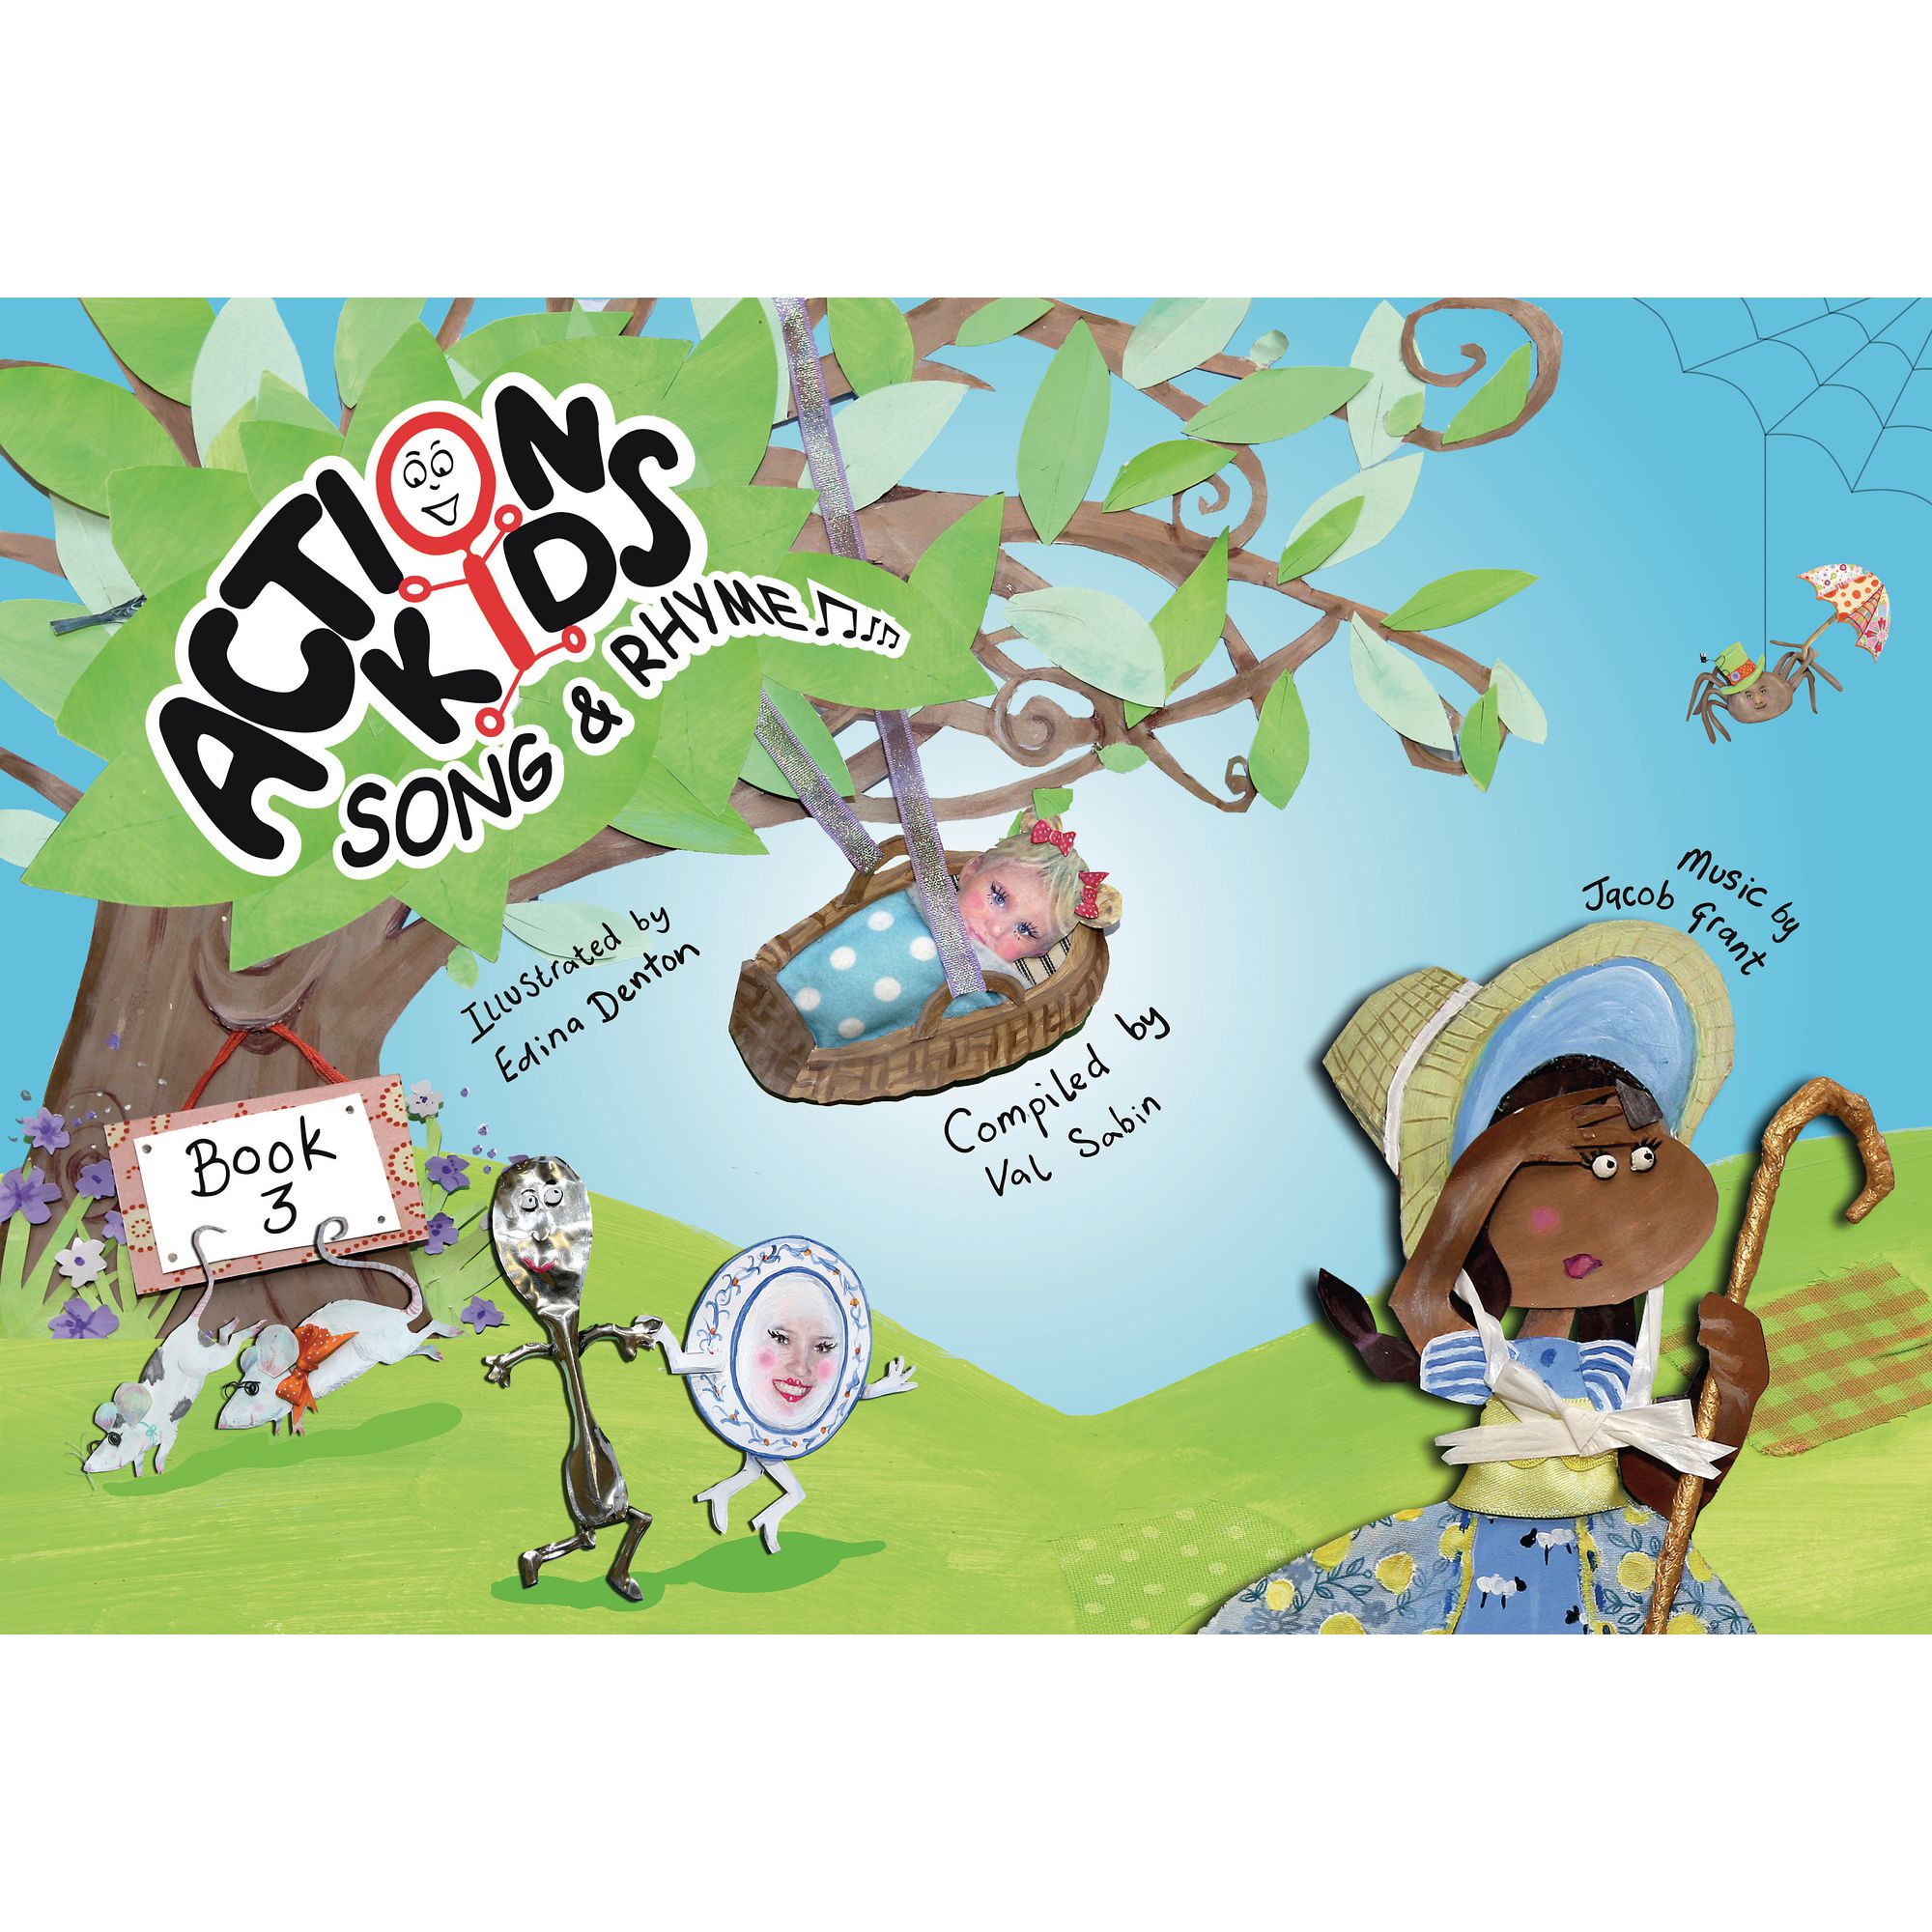 Action Kids Song Rhyme Book 3 Cd And Dvd